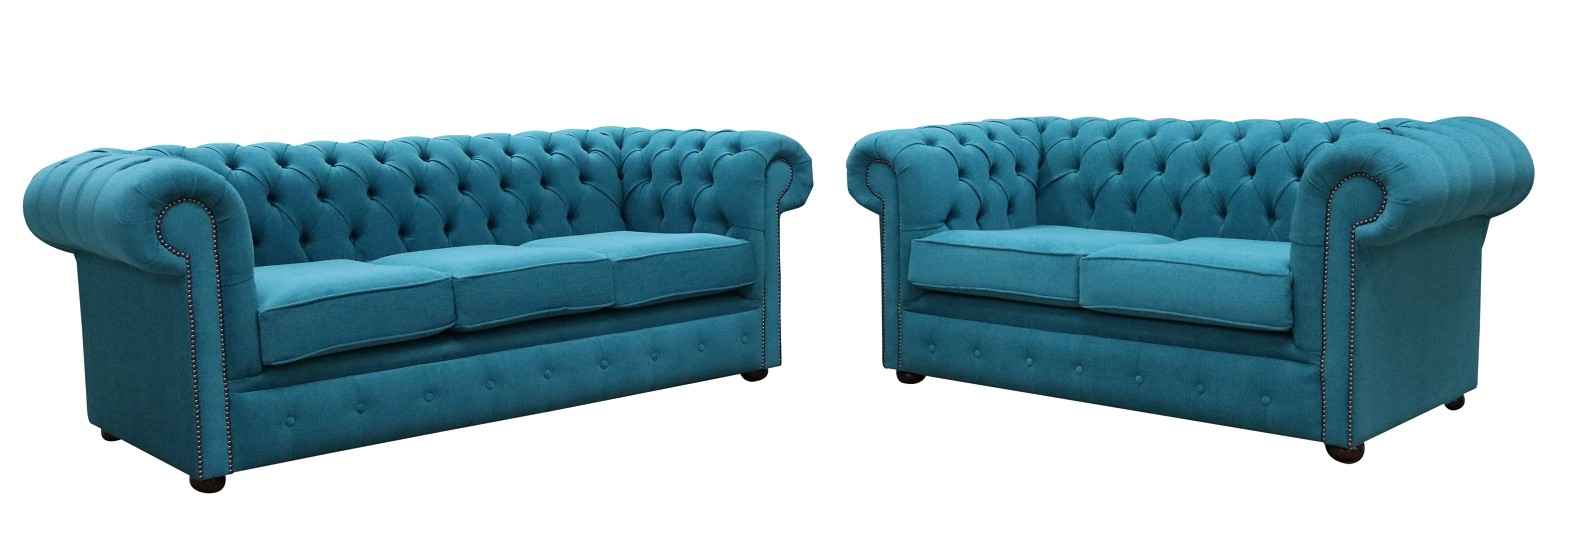 Comfort Meets Classic Chesterfield Sofas Redefined  %Post Title